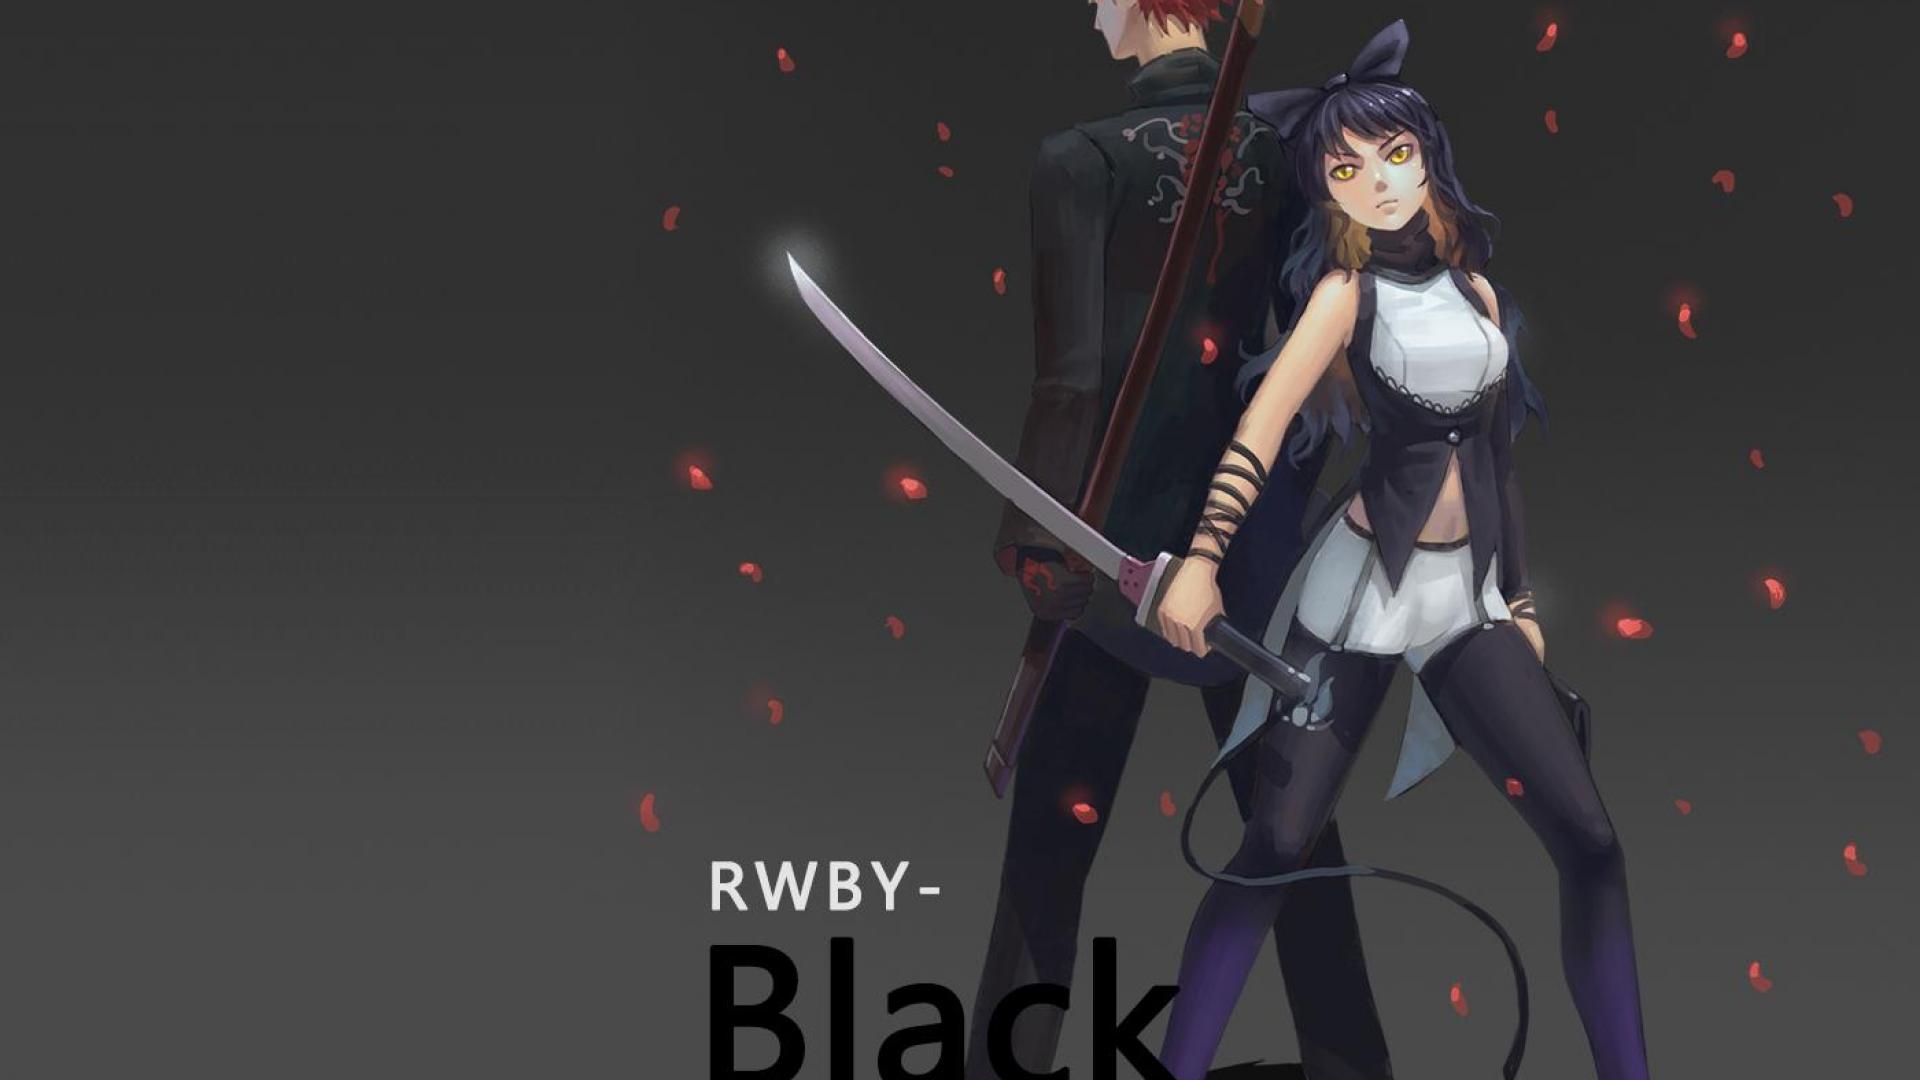 Rwby Black High Quality And Resolution Wallpaper On